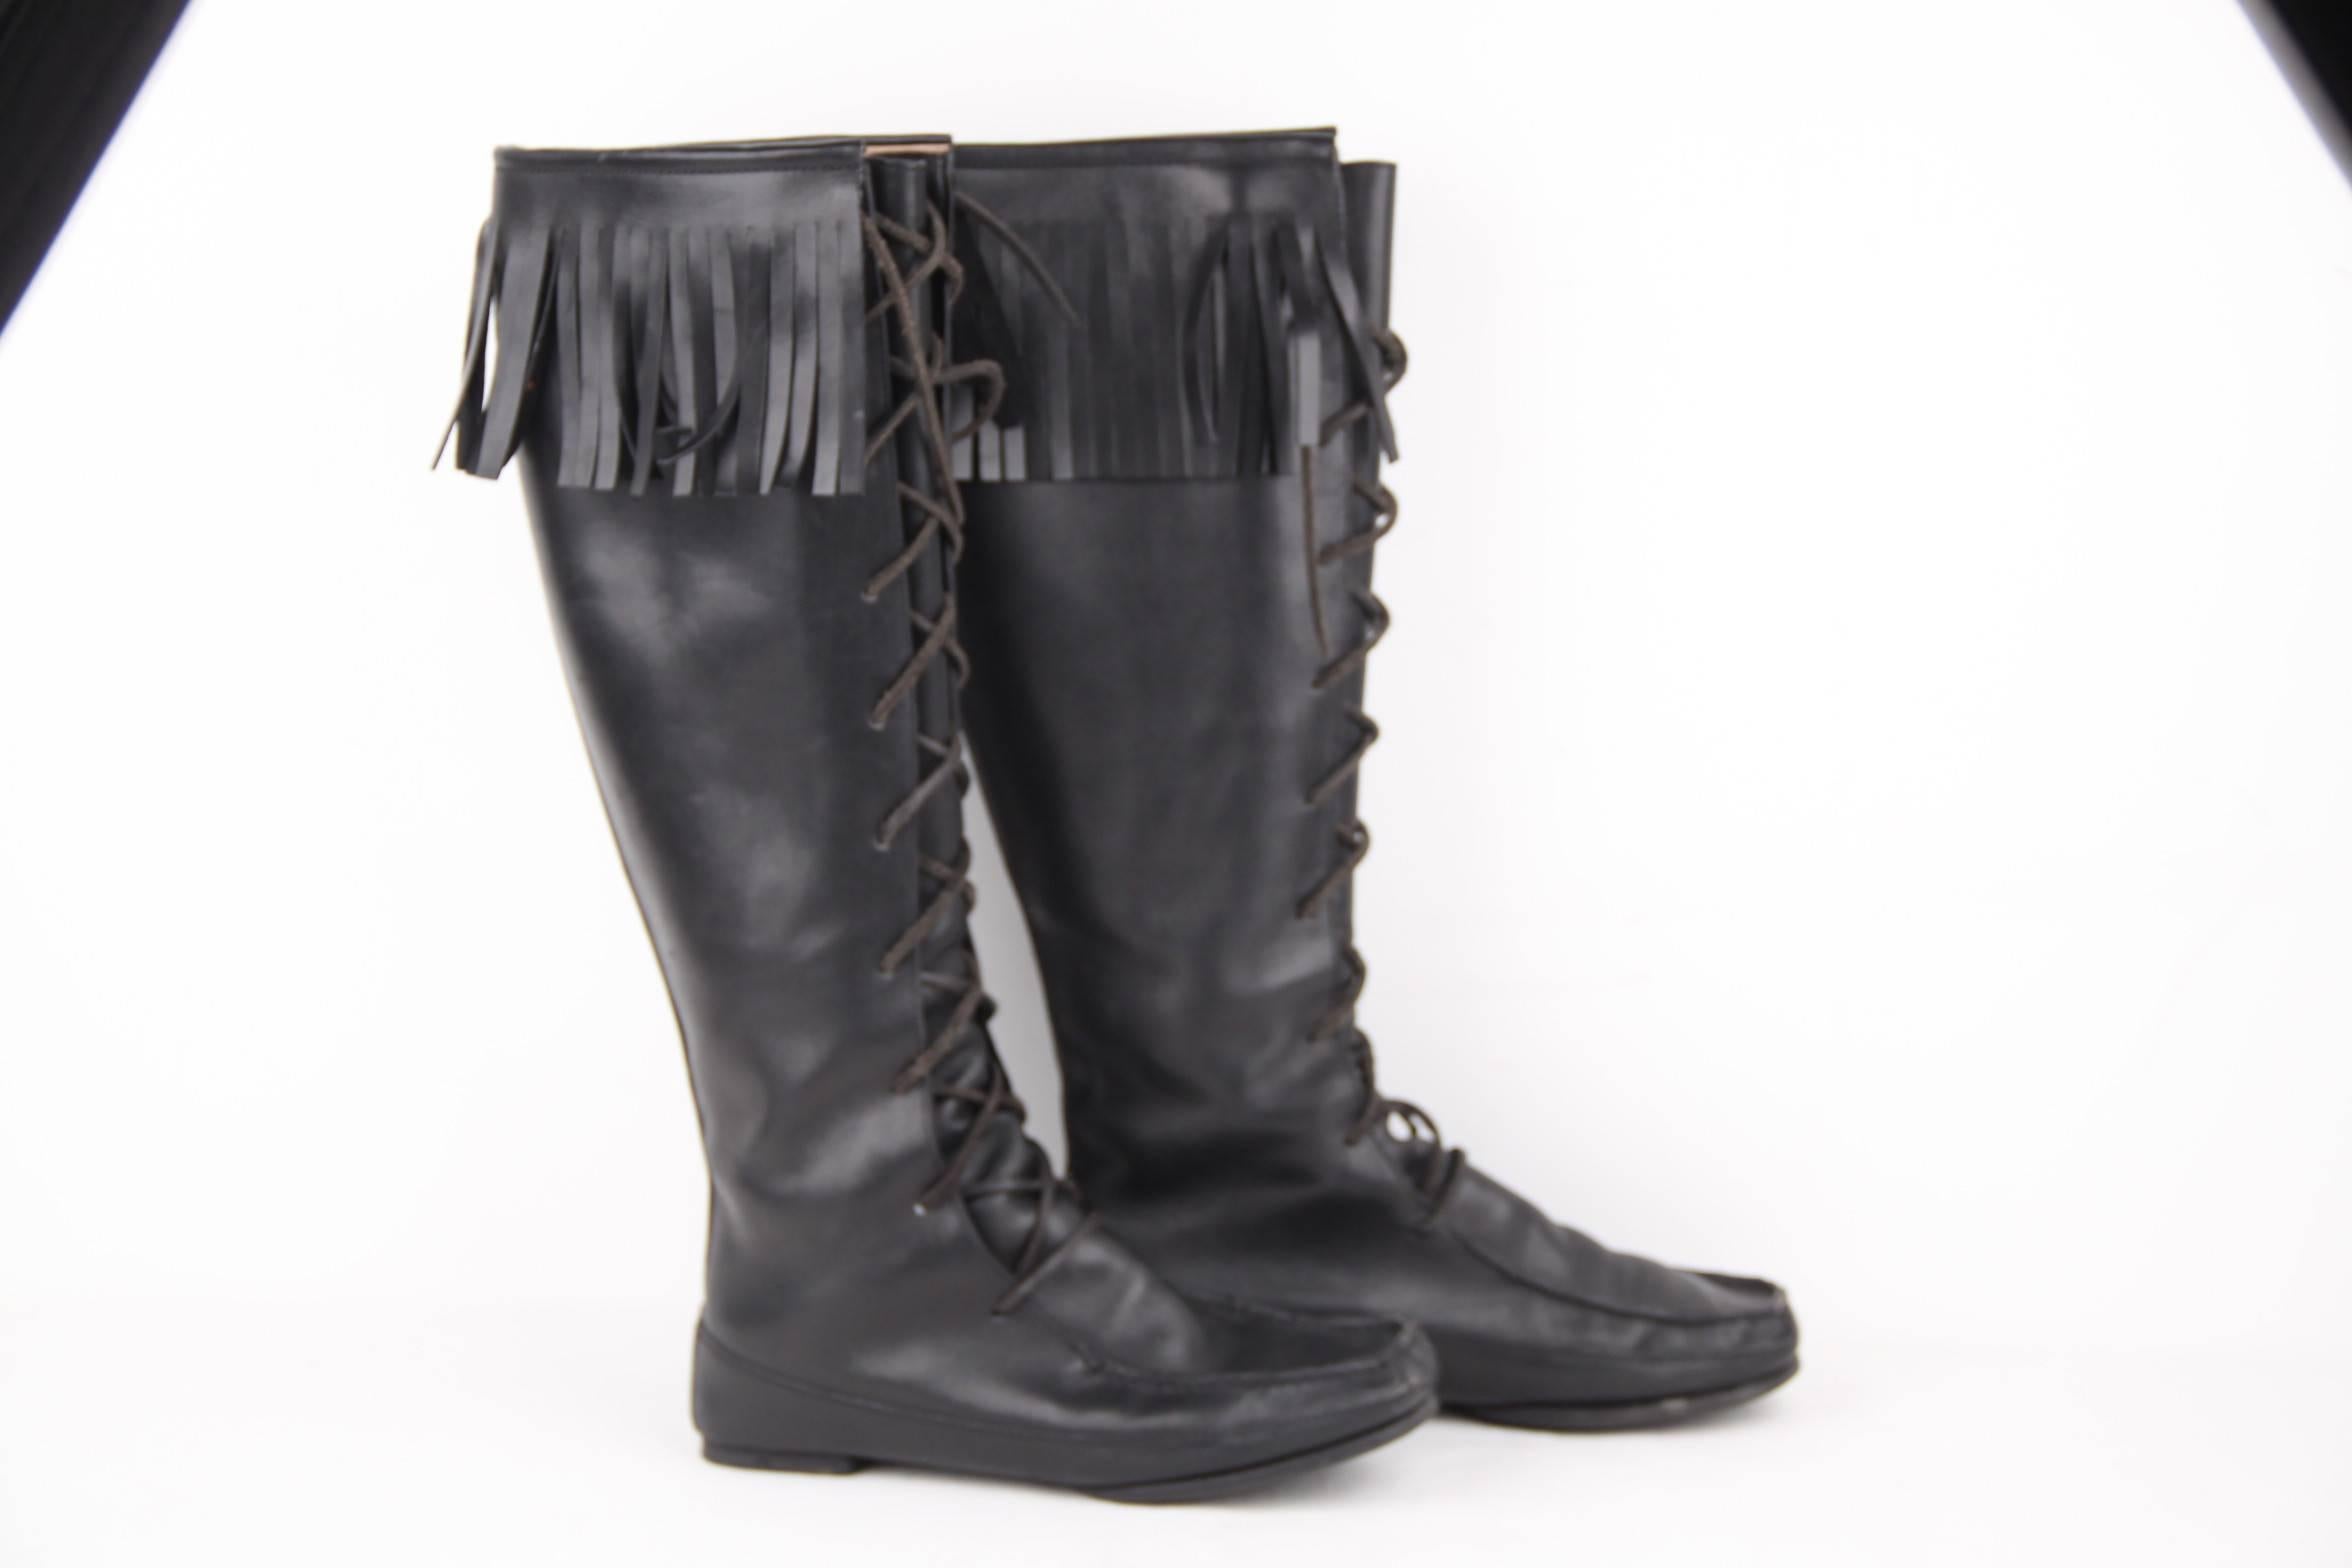 GUCCI Black Leather MOCASSINS Lace Up BOOTS Fringed SHOES Sz 37 1/2 In Excellent Condition In Rome, Rome